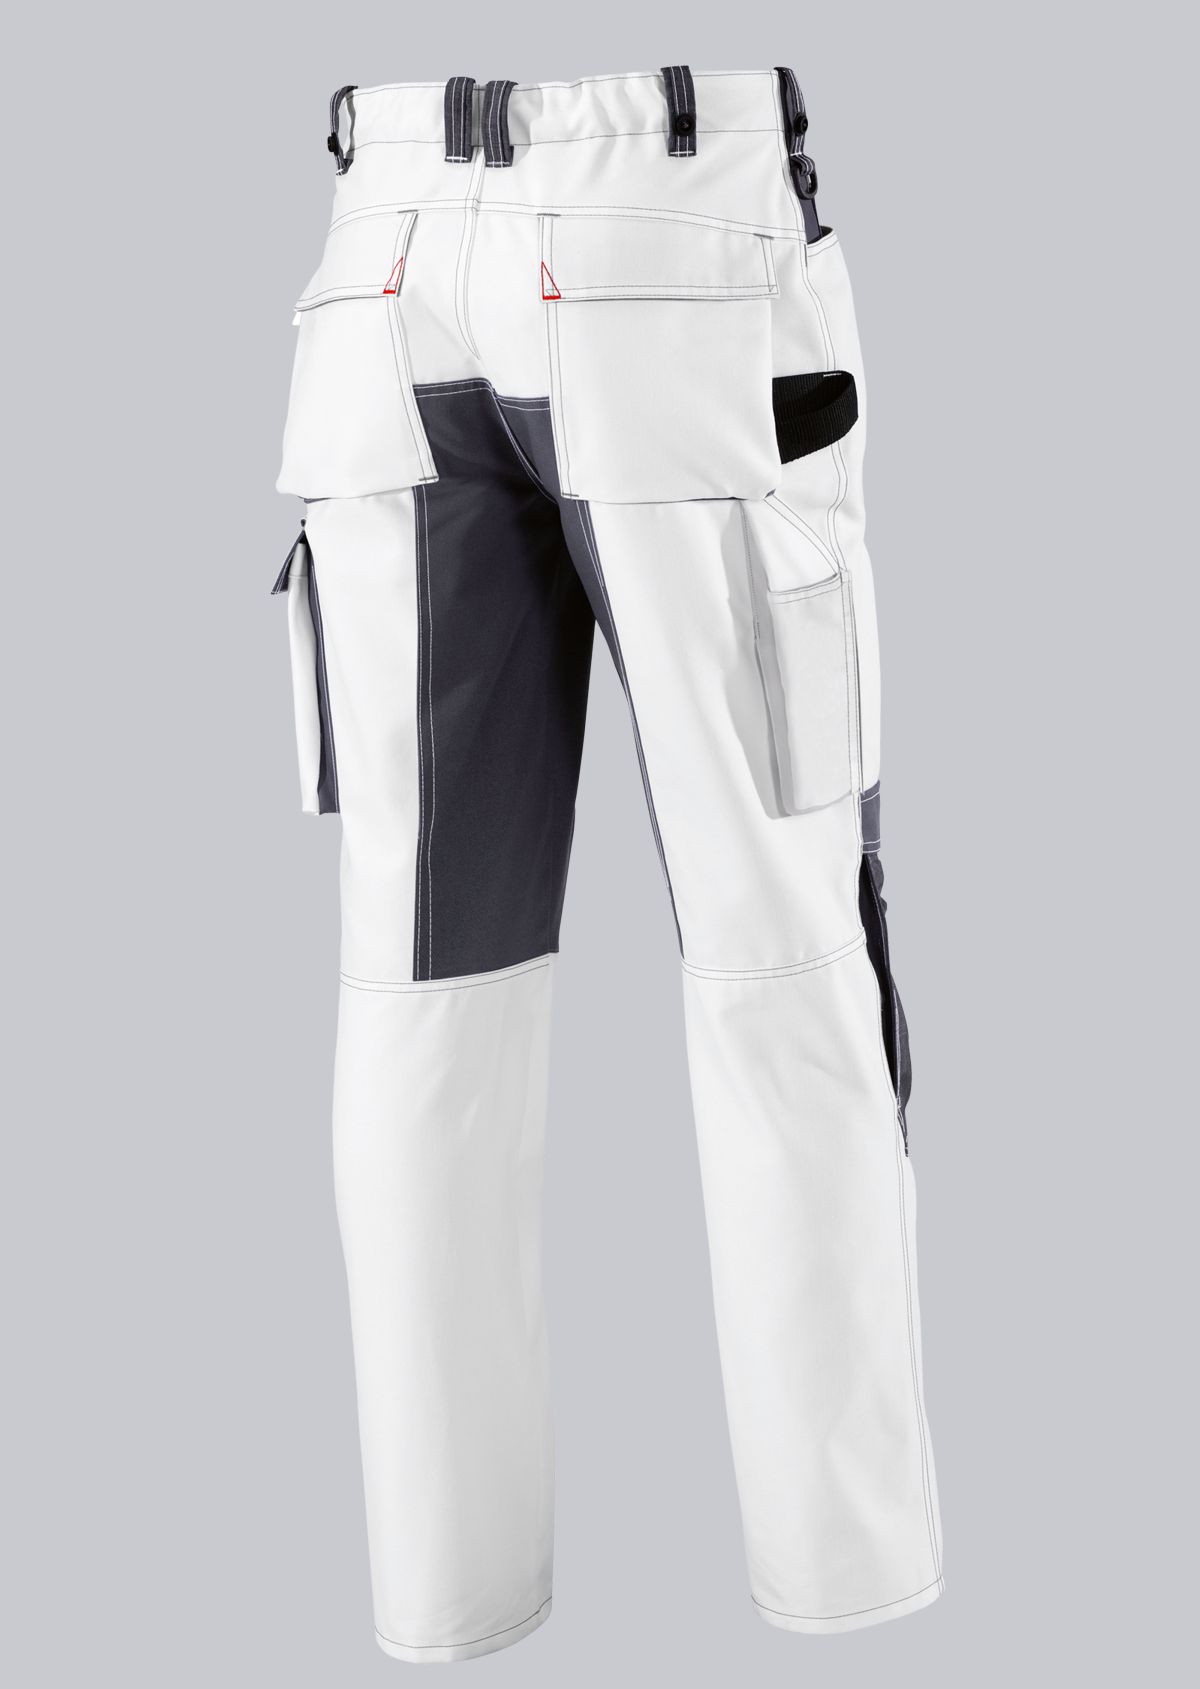 BP® Durable work trousers with knee pad pockets